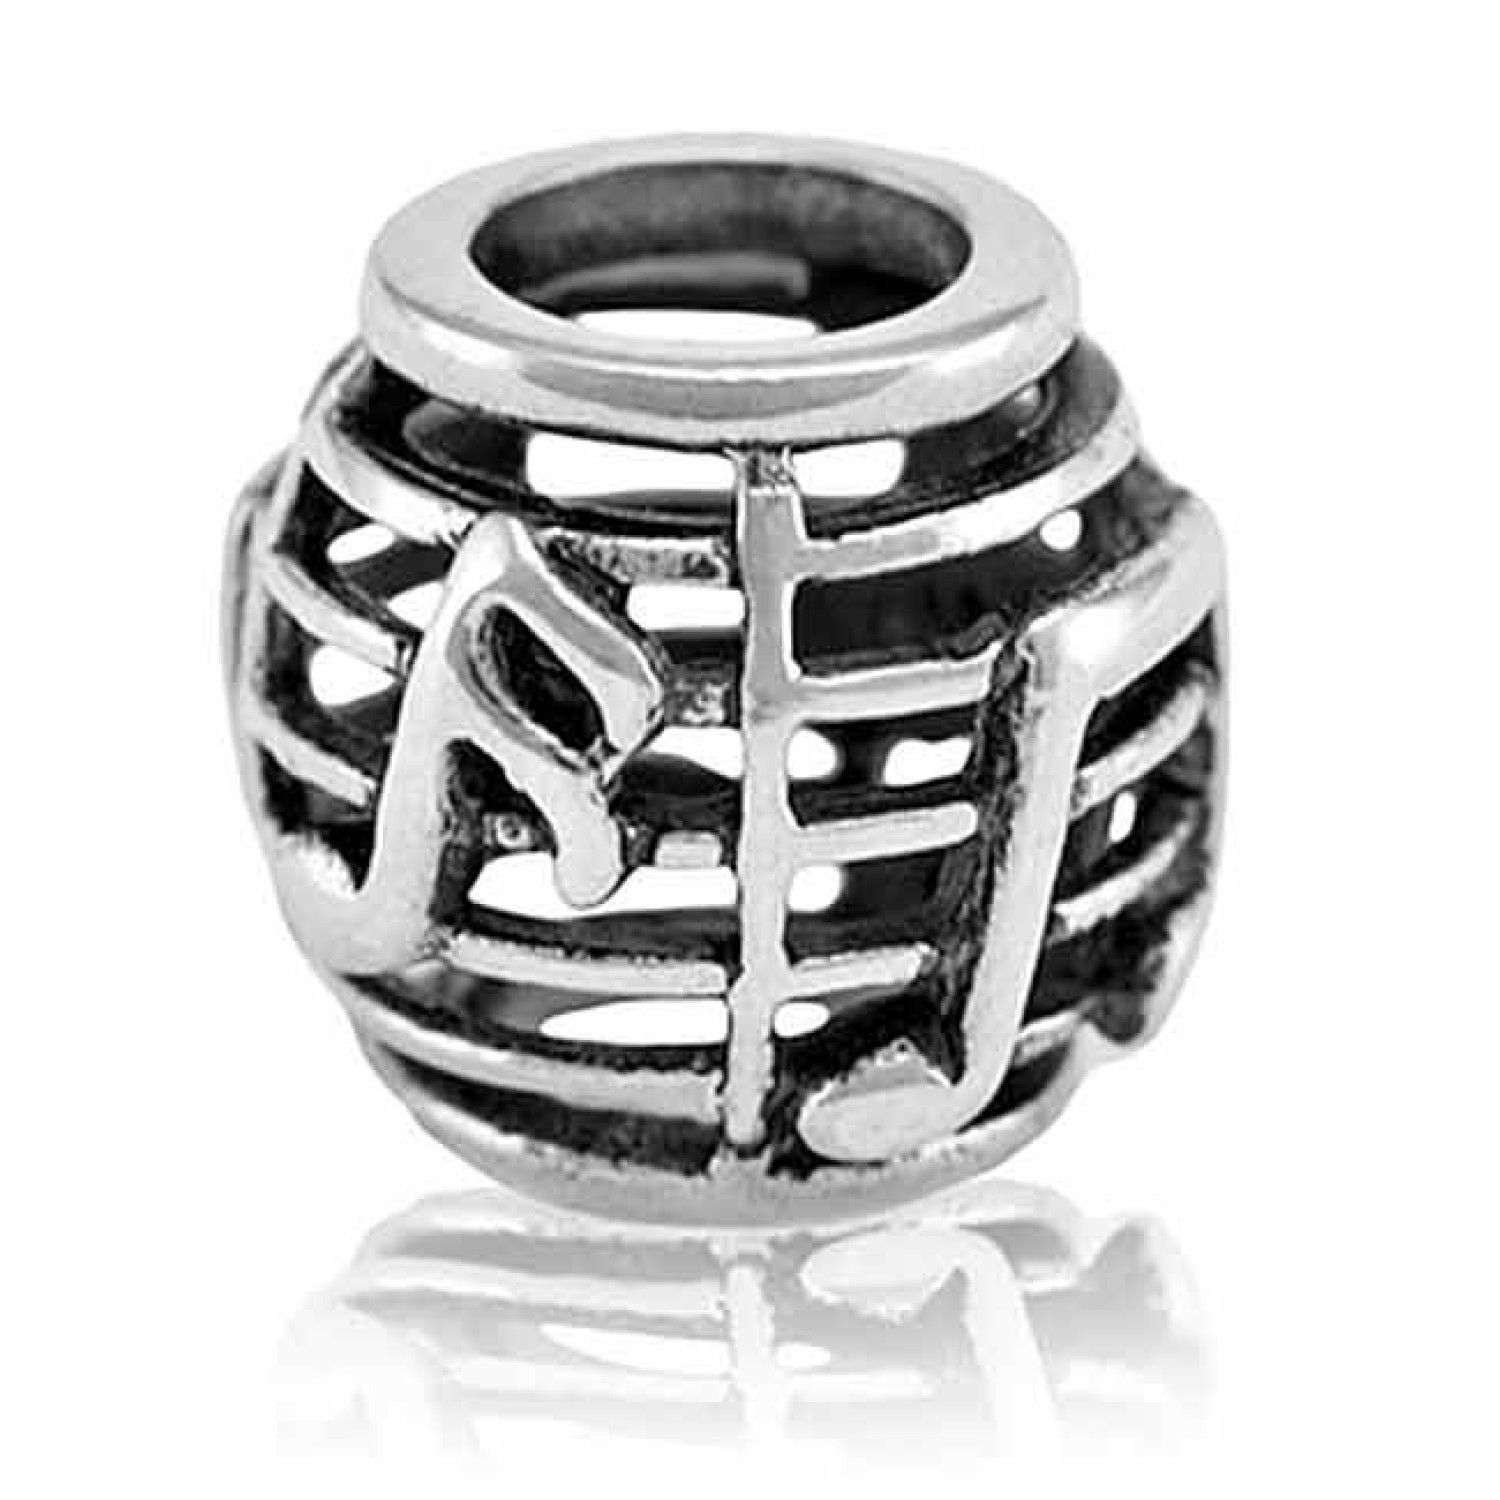 LK170  Evolve  Charm New Zealand Music. LK170  Evolve 925 Sterling Silver Charm New Zealand Music A cultural icon in New Zealand, proudly worn by many of us year round, jandals are a symbol of the laid-back Kiwi lifestyle and long, hot summers at the beac